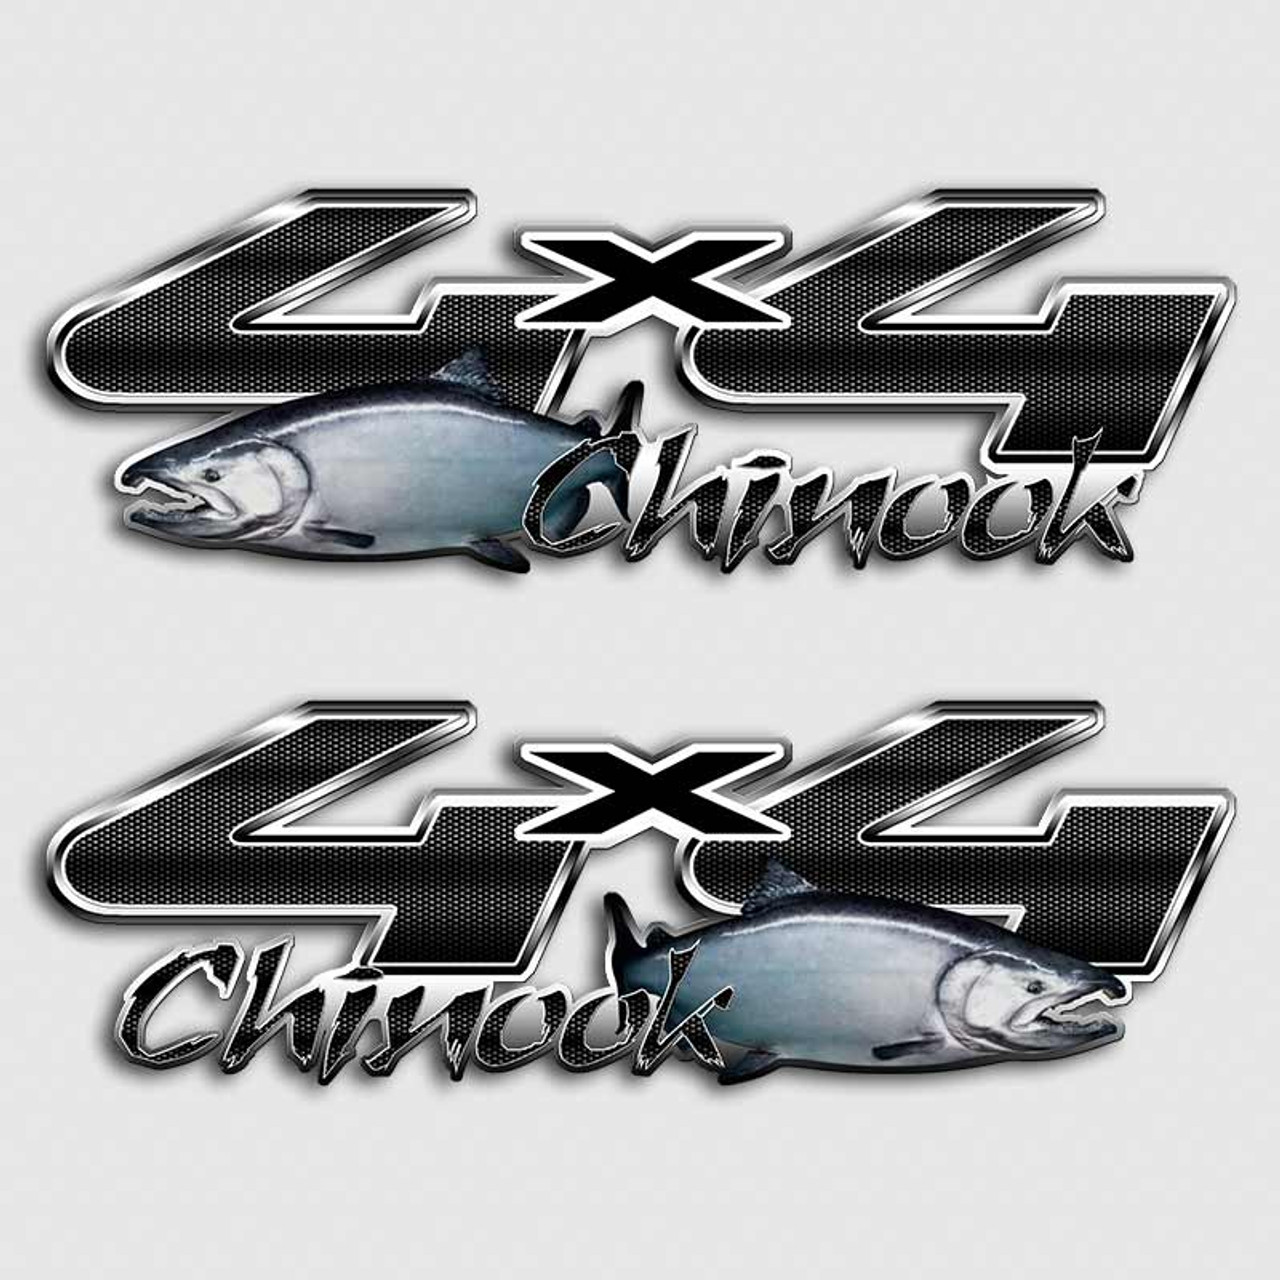 Chinook Salmon Truck Decals  Alaskan Angler Ford Truck Decals